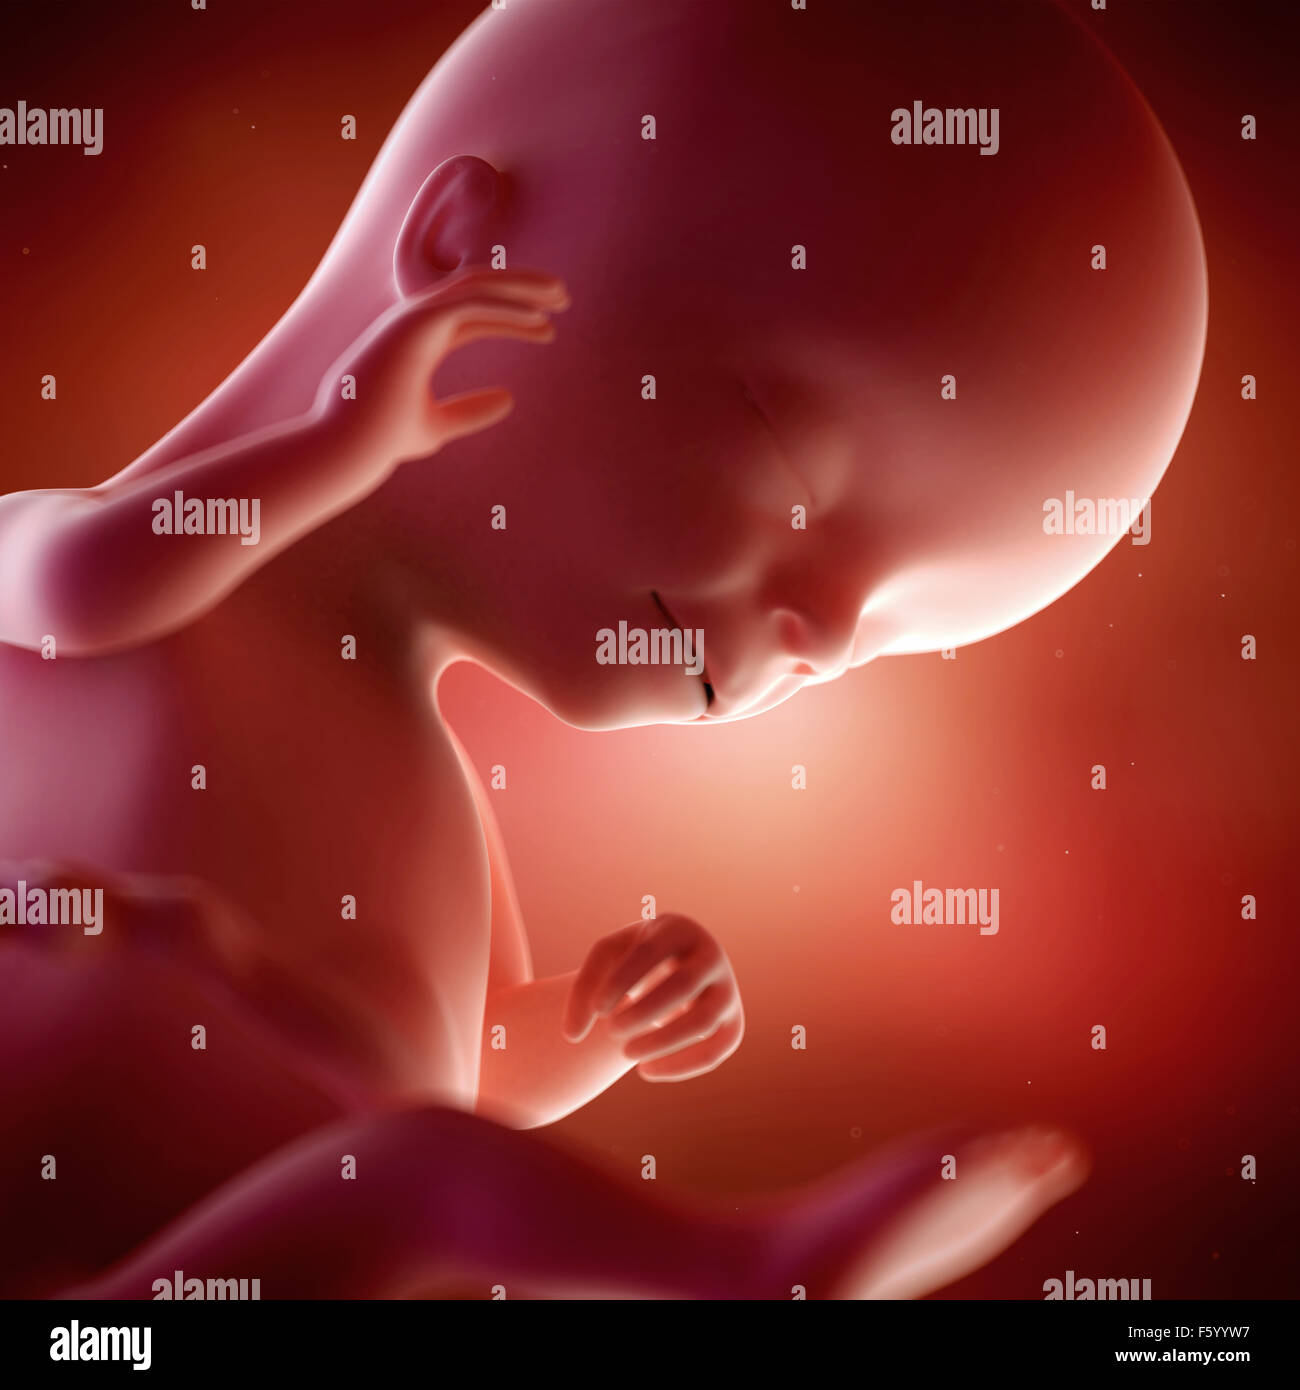 medical accurate 3d illustration of a fetus week 16 Stock Photo